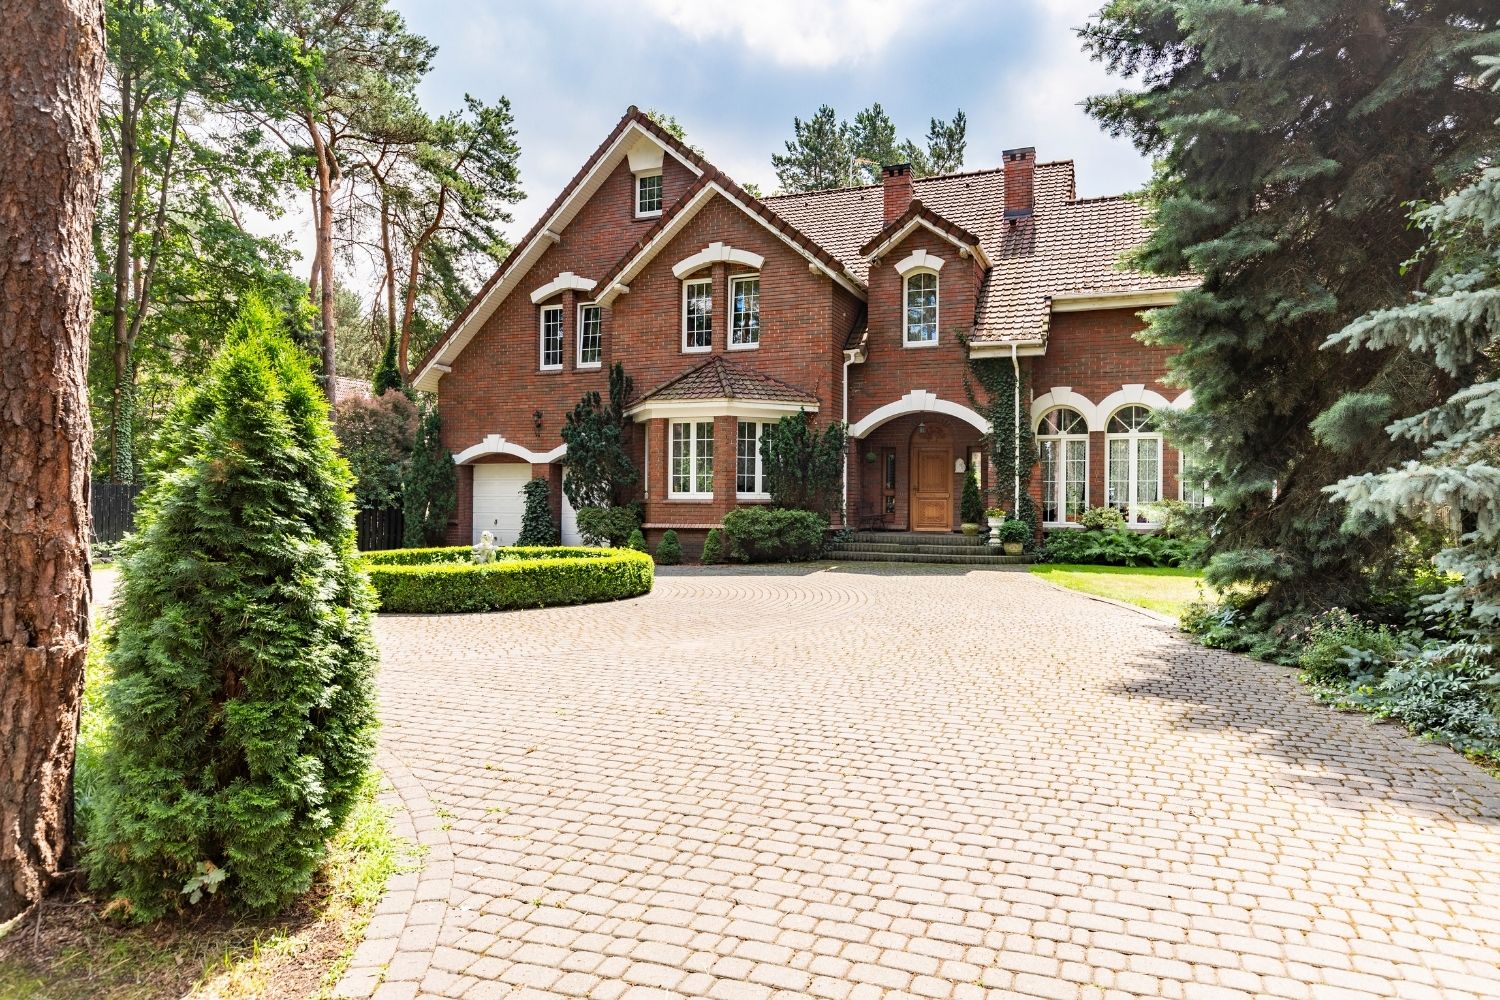 Red brick house with brick driveway surrounded by trees